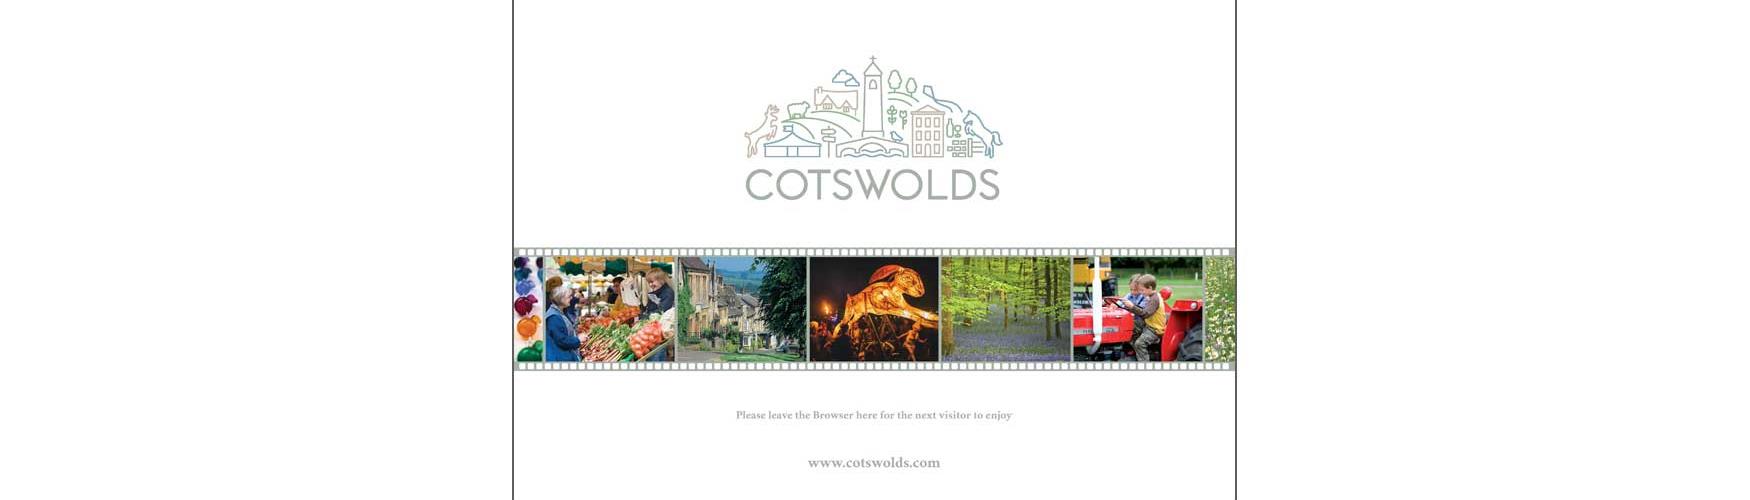 Advertise in the Cotswolds Browser